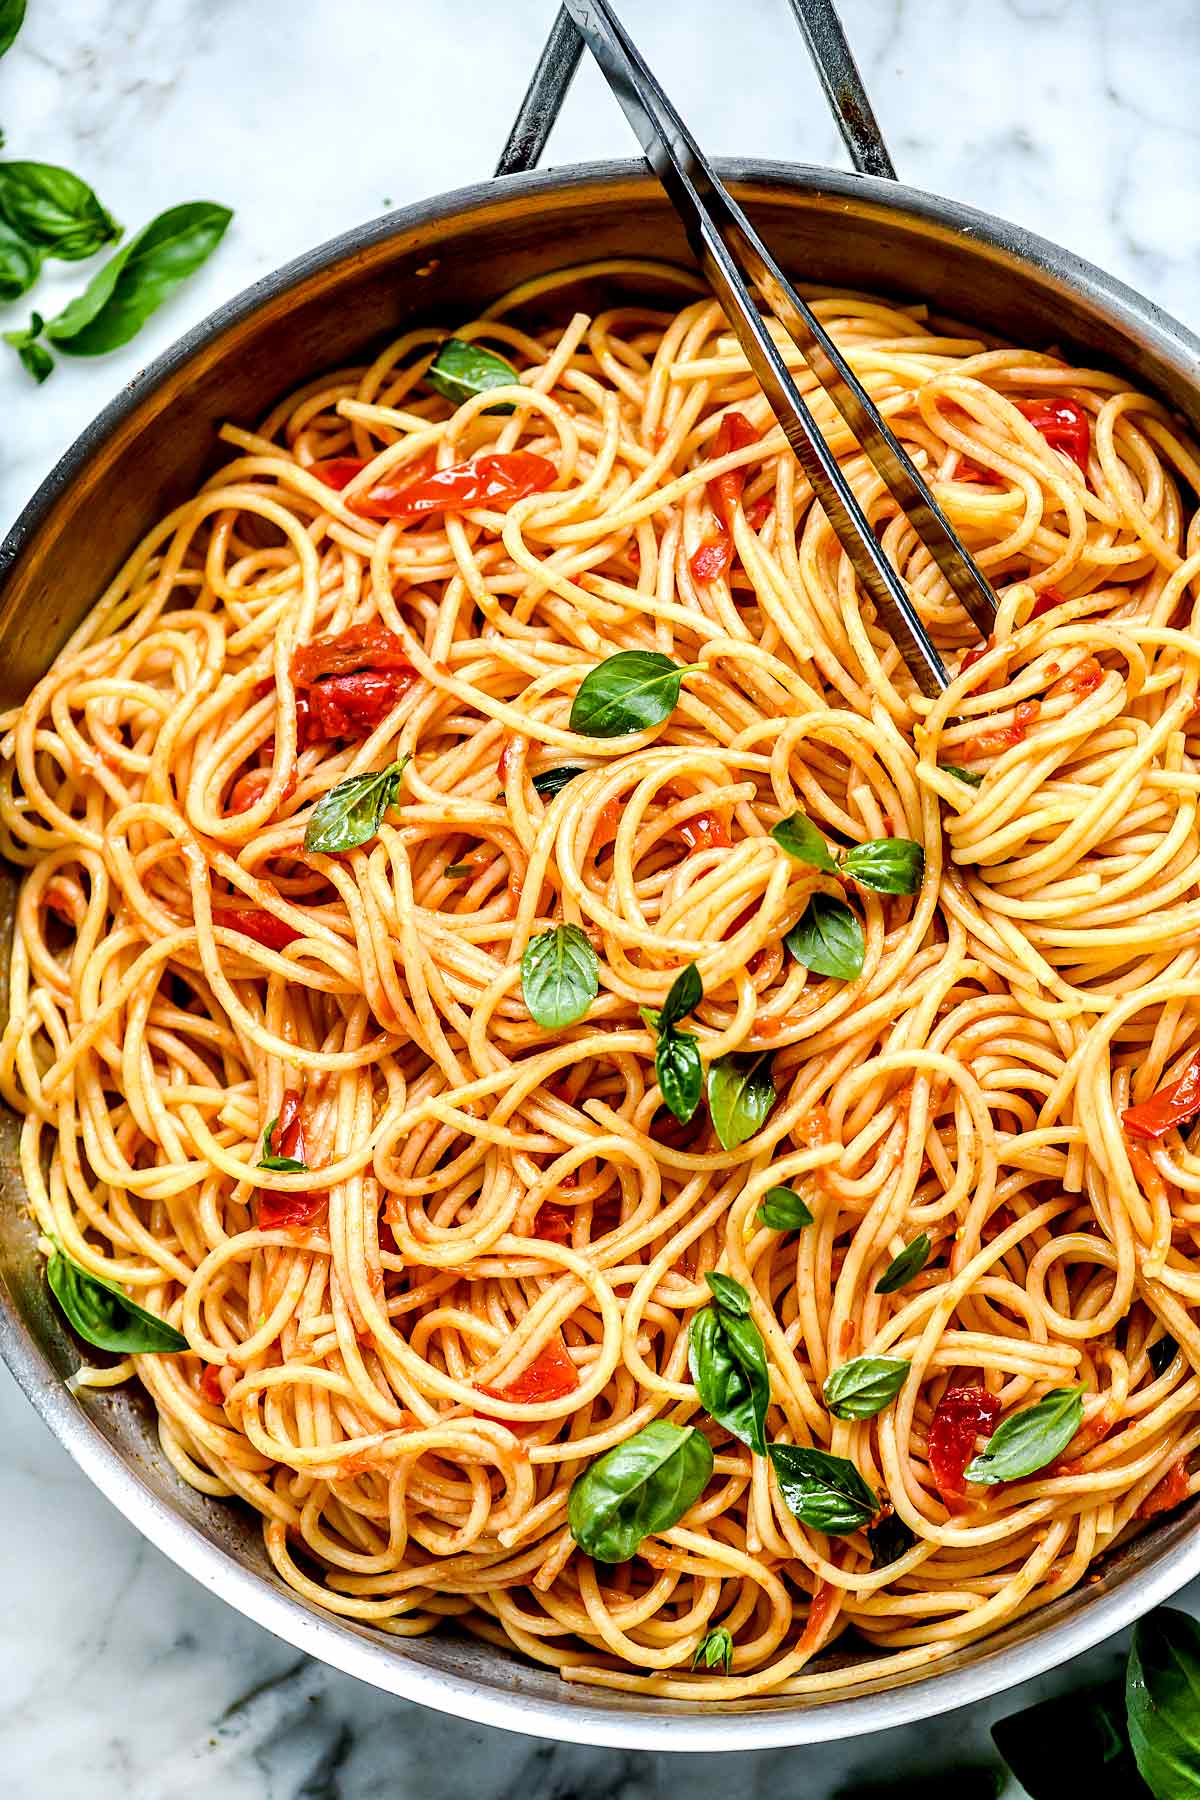 Create Your Own Pasta, Lunch & Dinner Menu